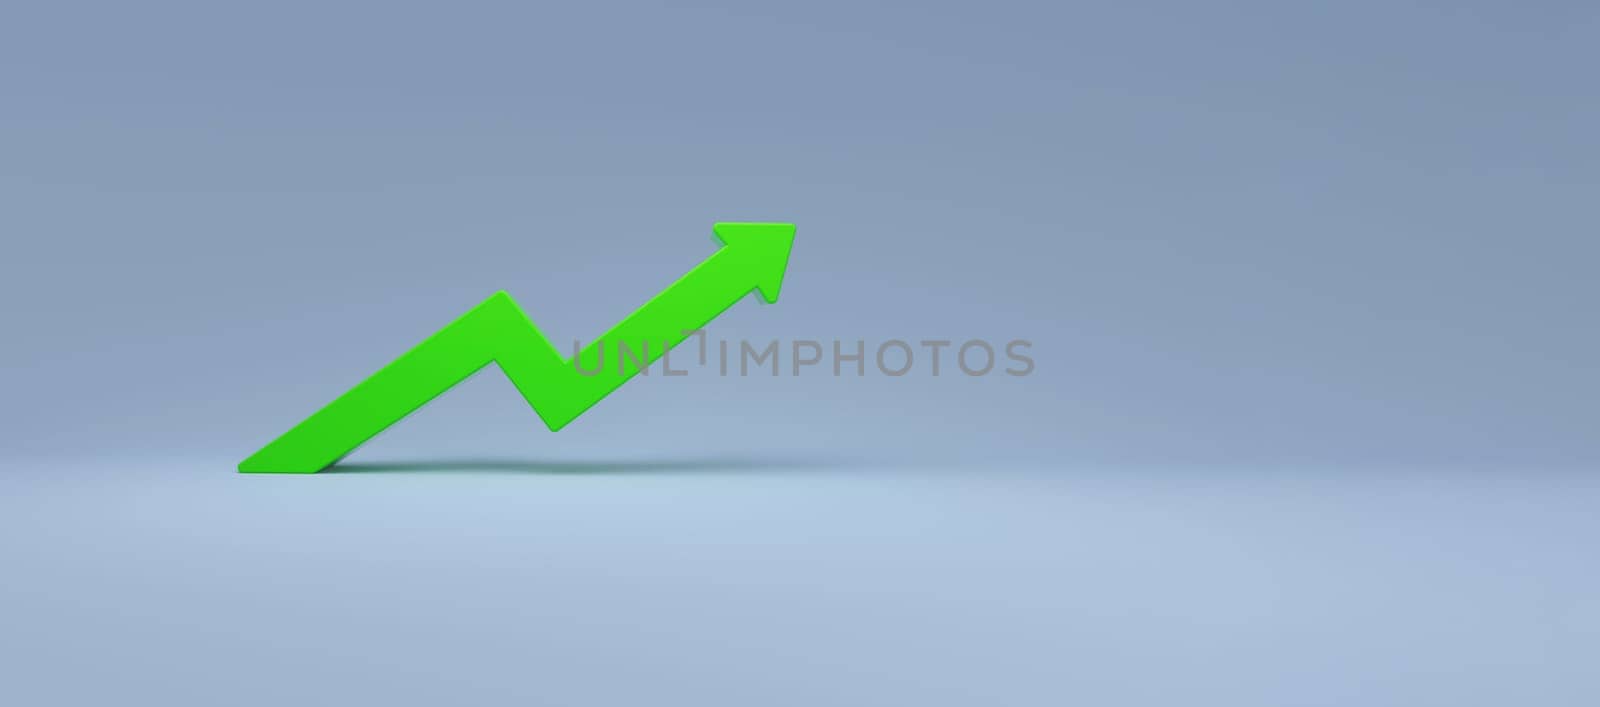 3D illustration of a bright green upward arrow, symbolizing growth or increase, set against a soft grey background.